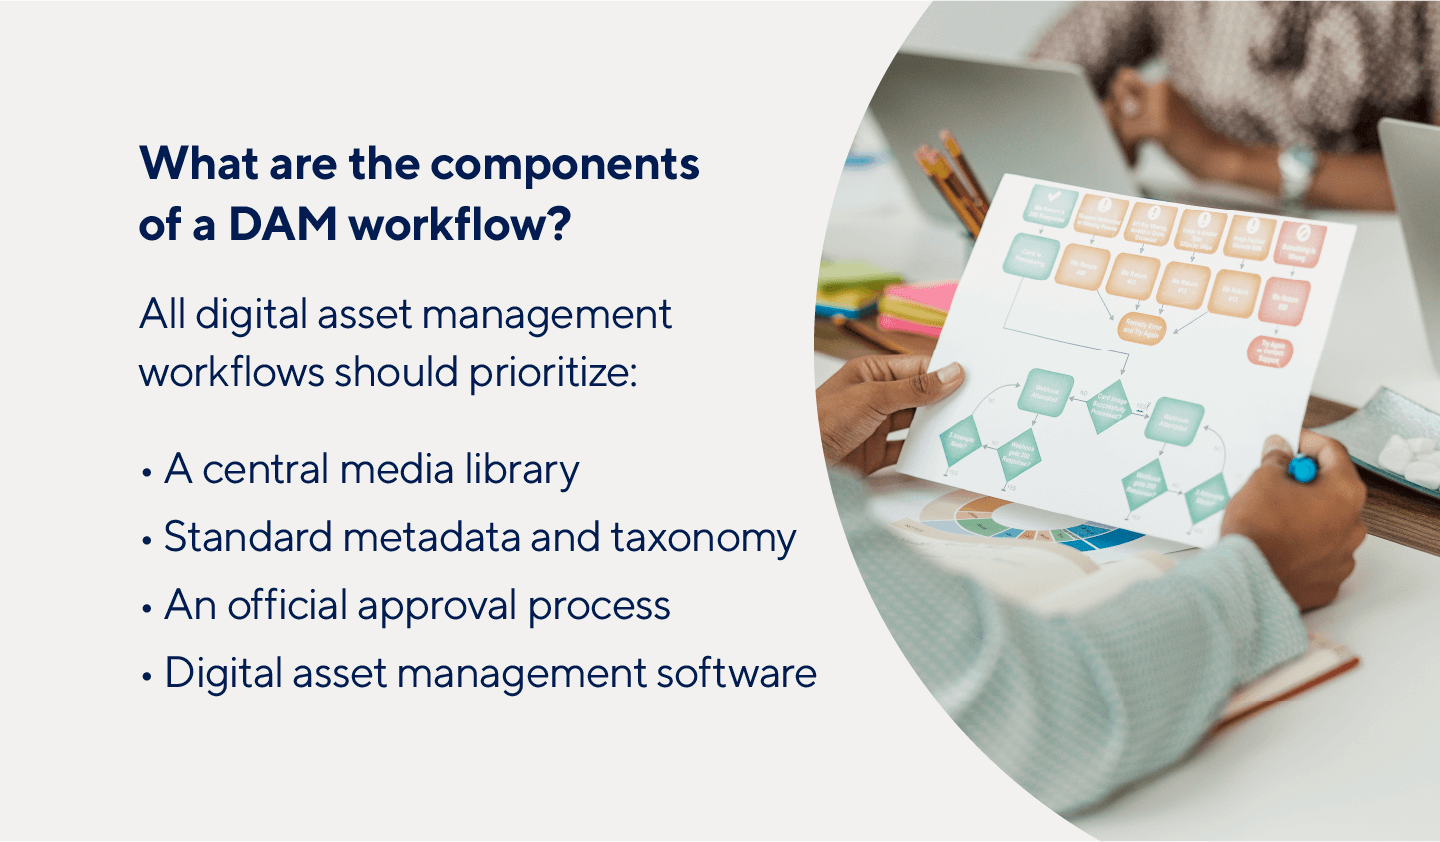 A central media library and DAM software are two components of a digital asset management workflow.